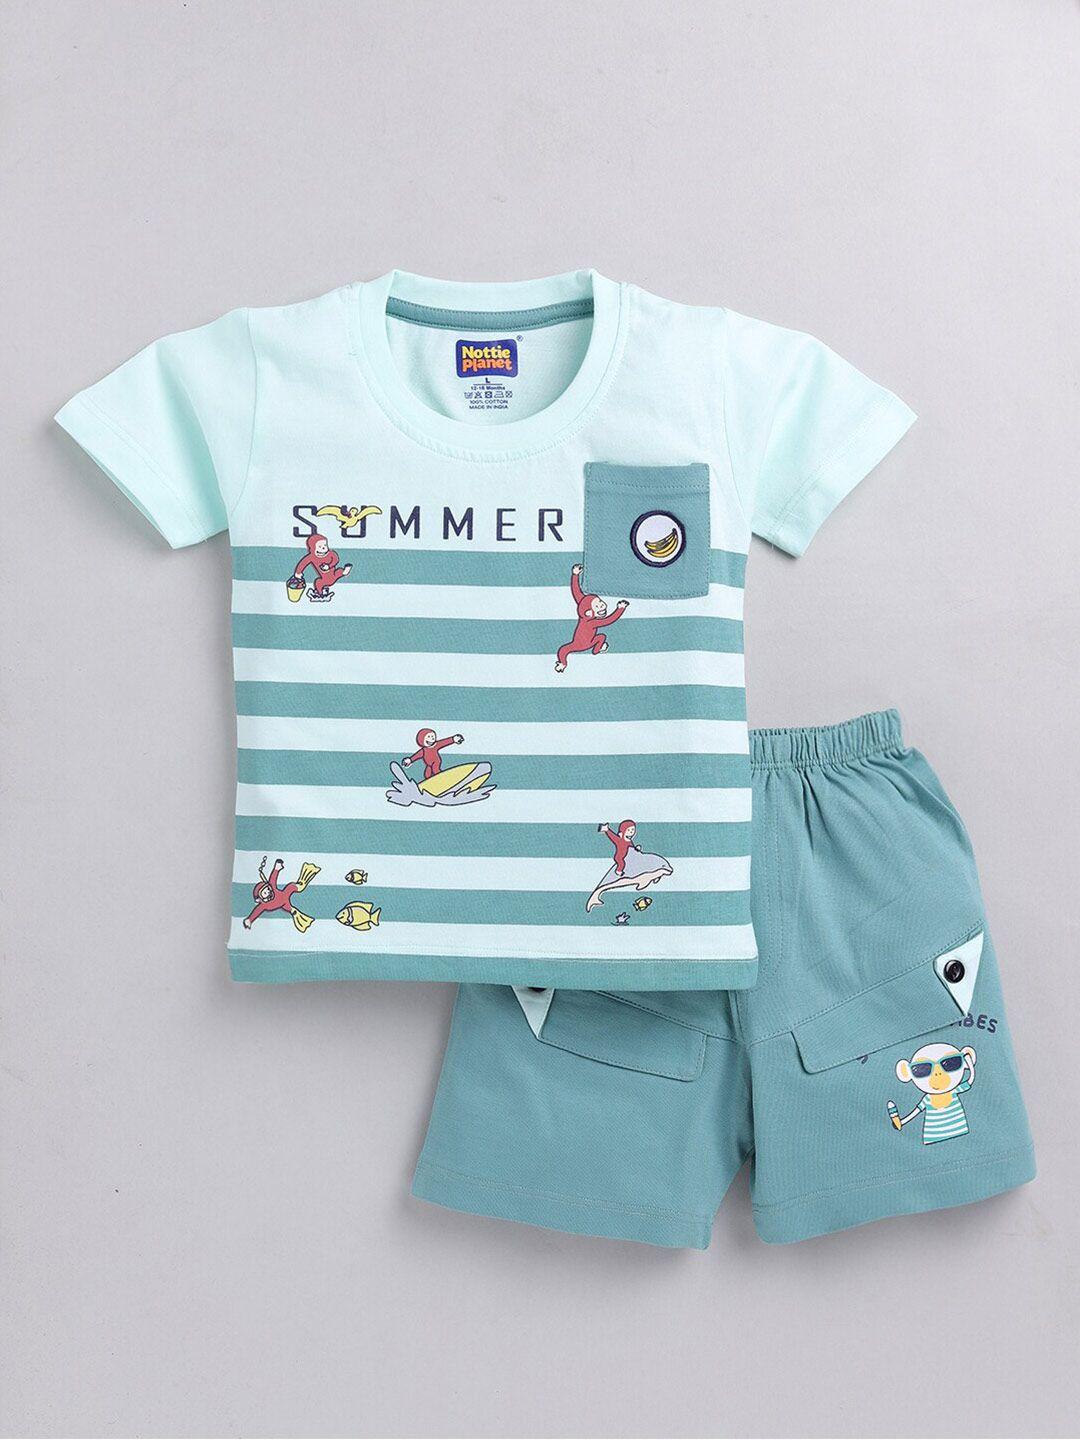 nottie planet boys printed pure cotton t-shirt with shorts set